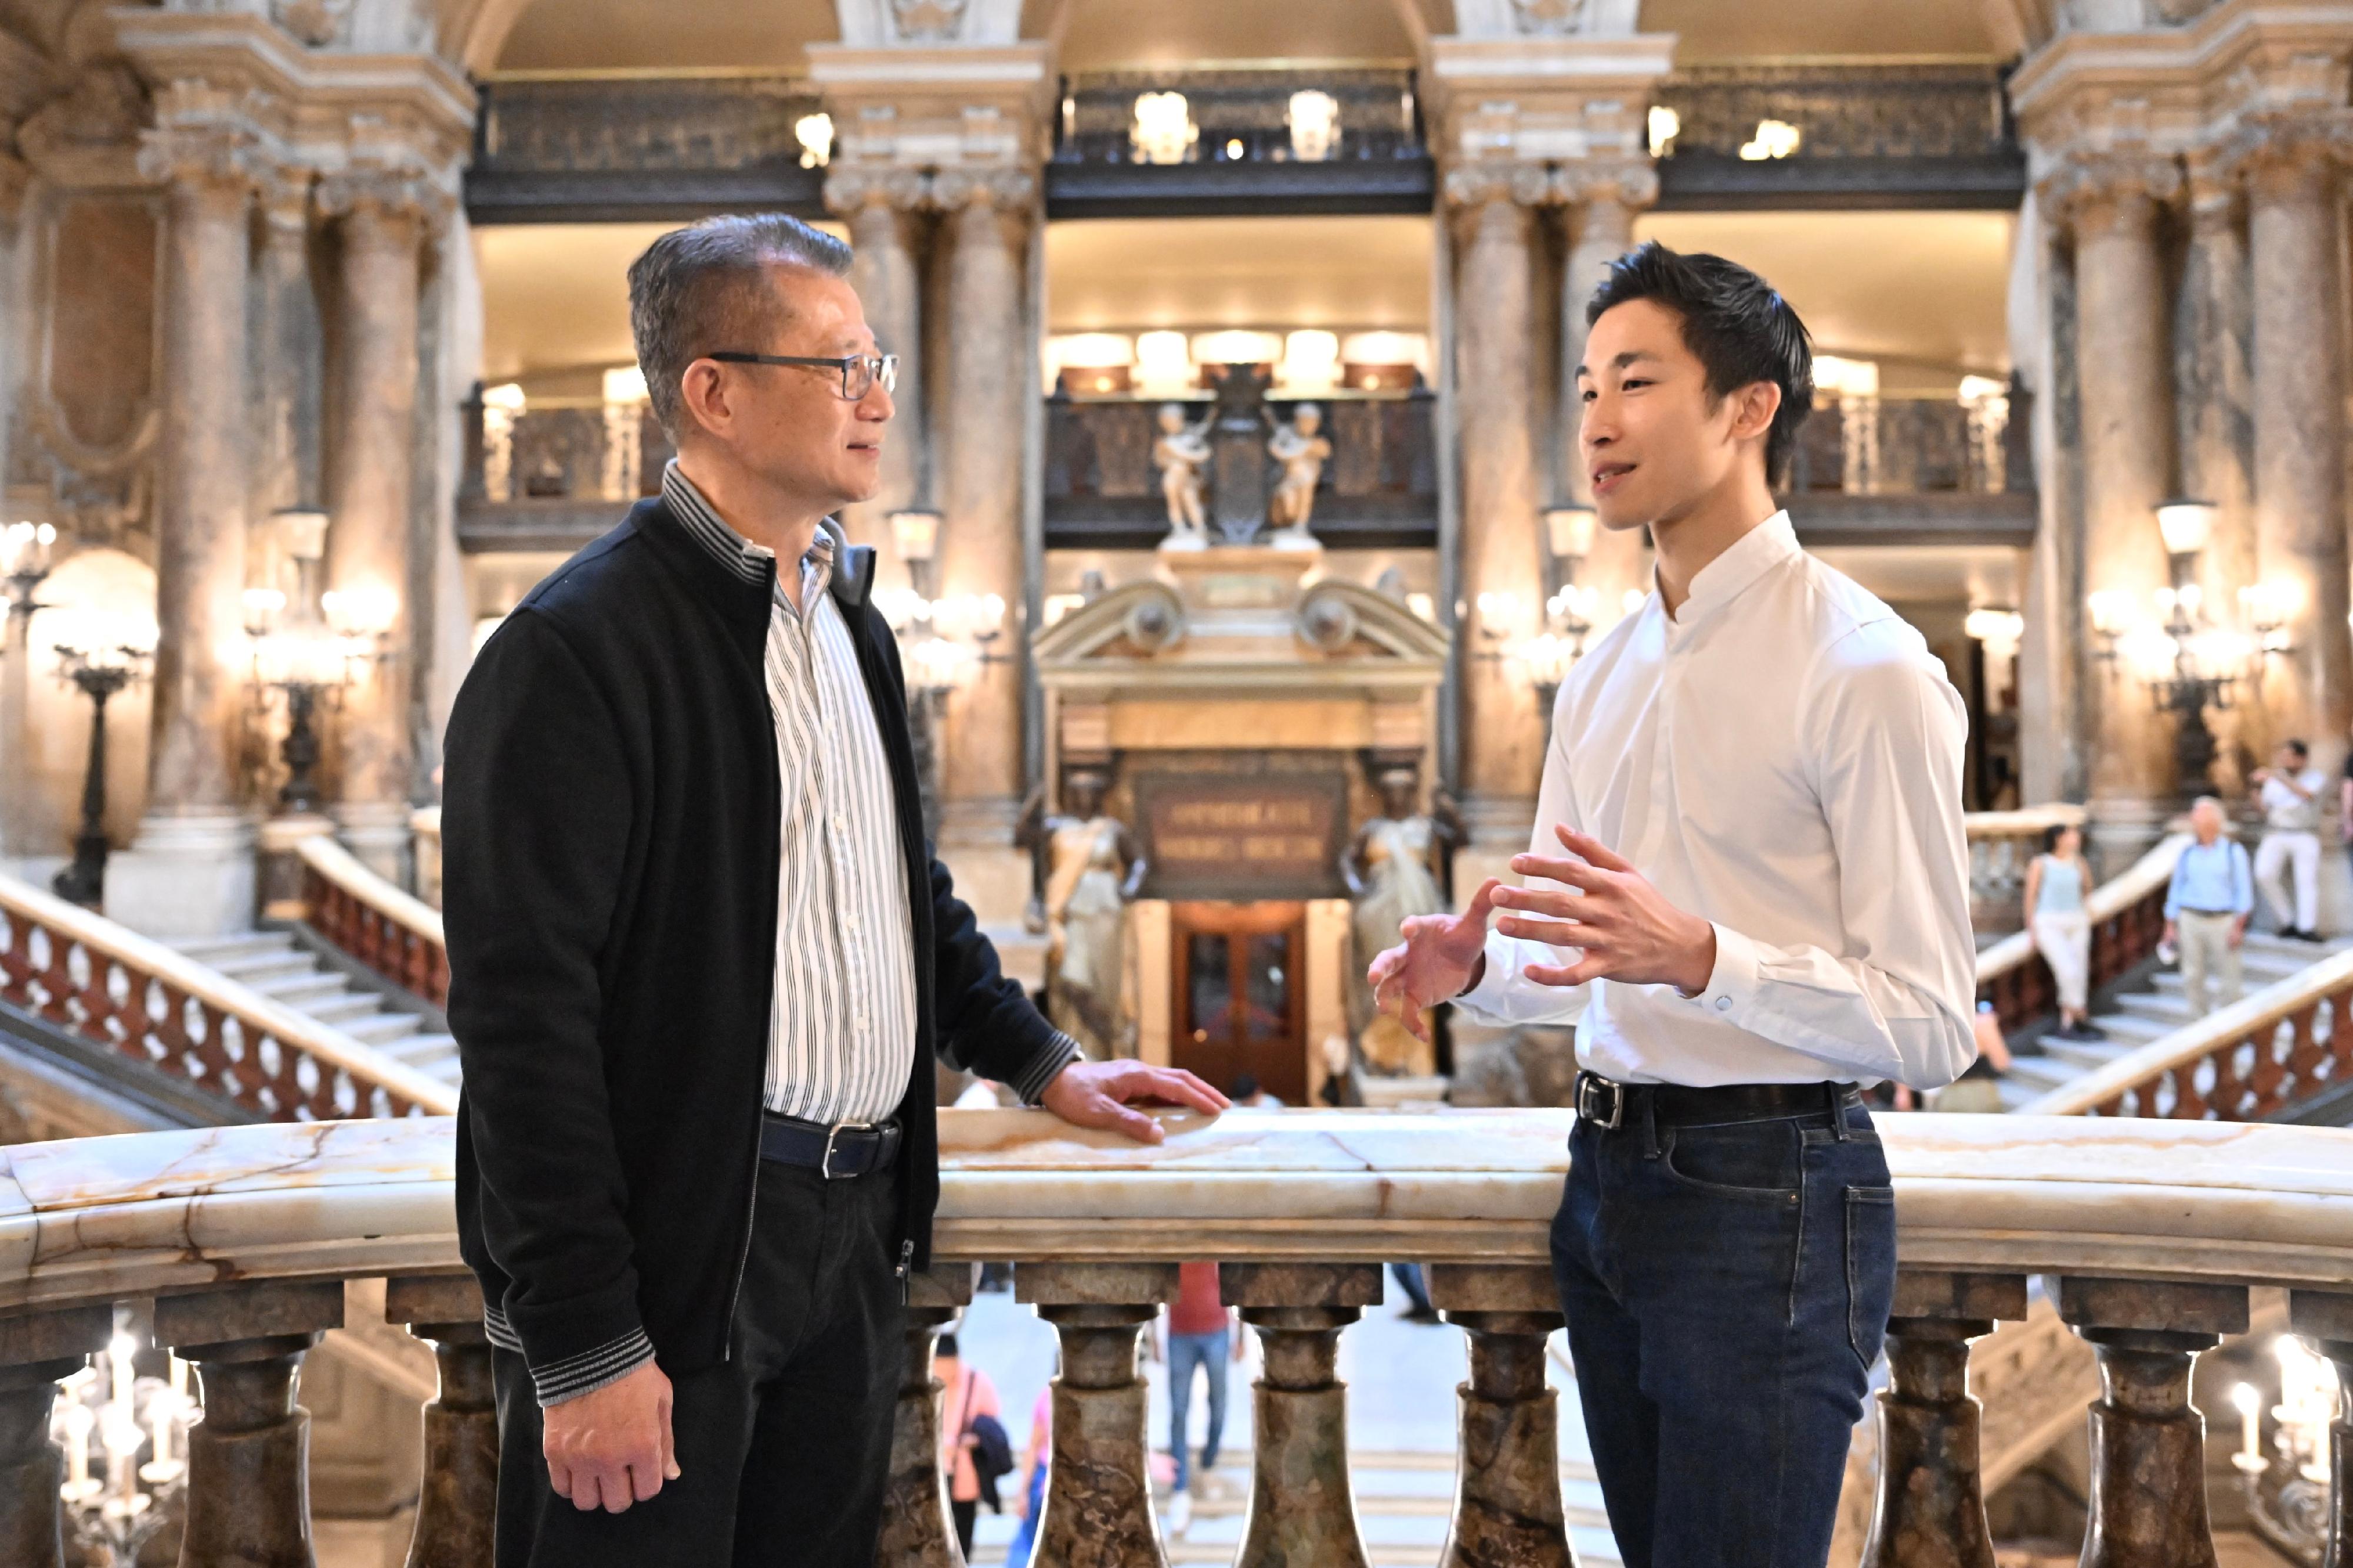 The Financial Secretary, Mr Paul Chan (left), met with a young Hong Kong ballet dancer in Paris, France, on September 17 (Paris time), and learned about his journey in pursuing performing arts.